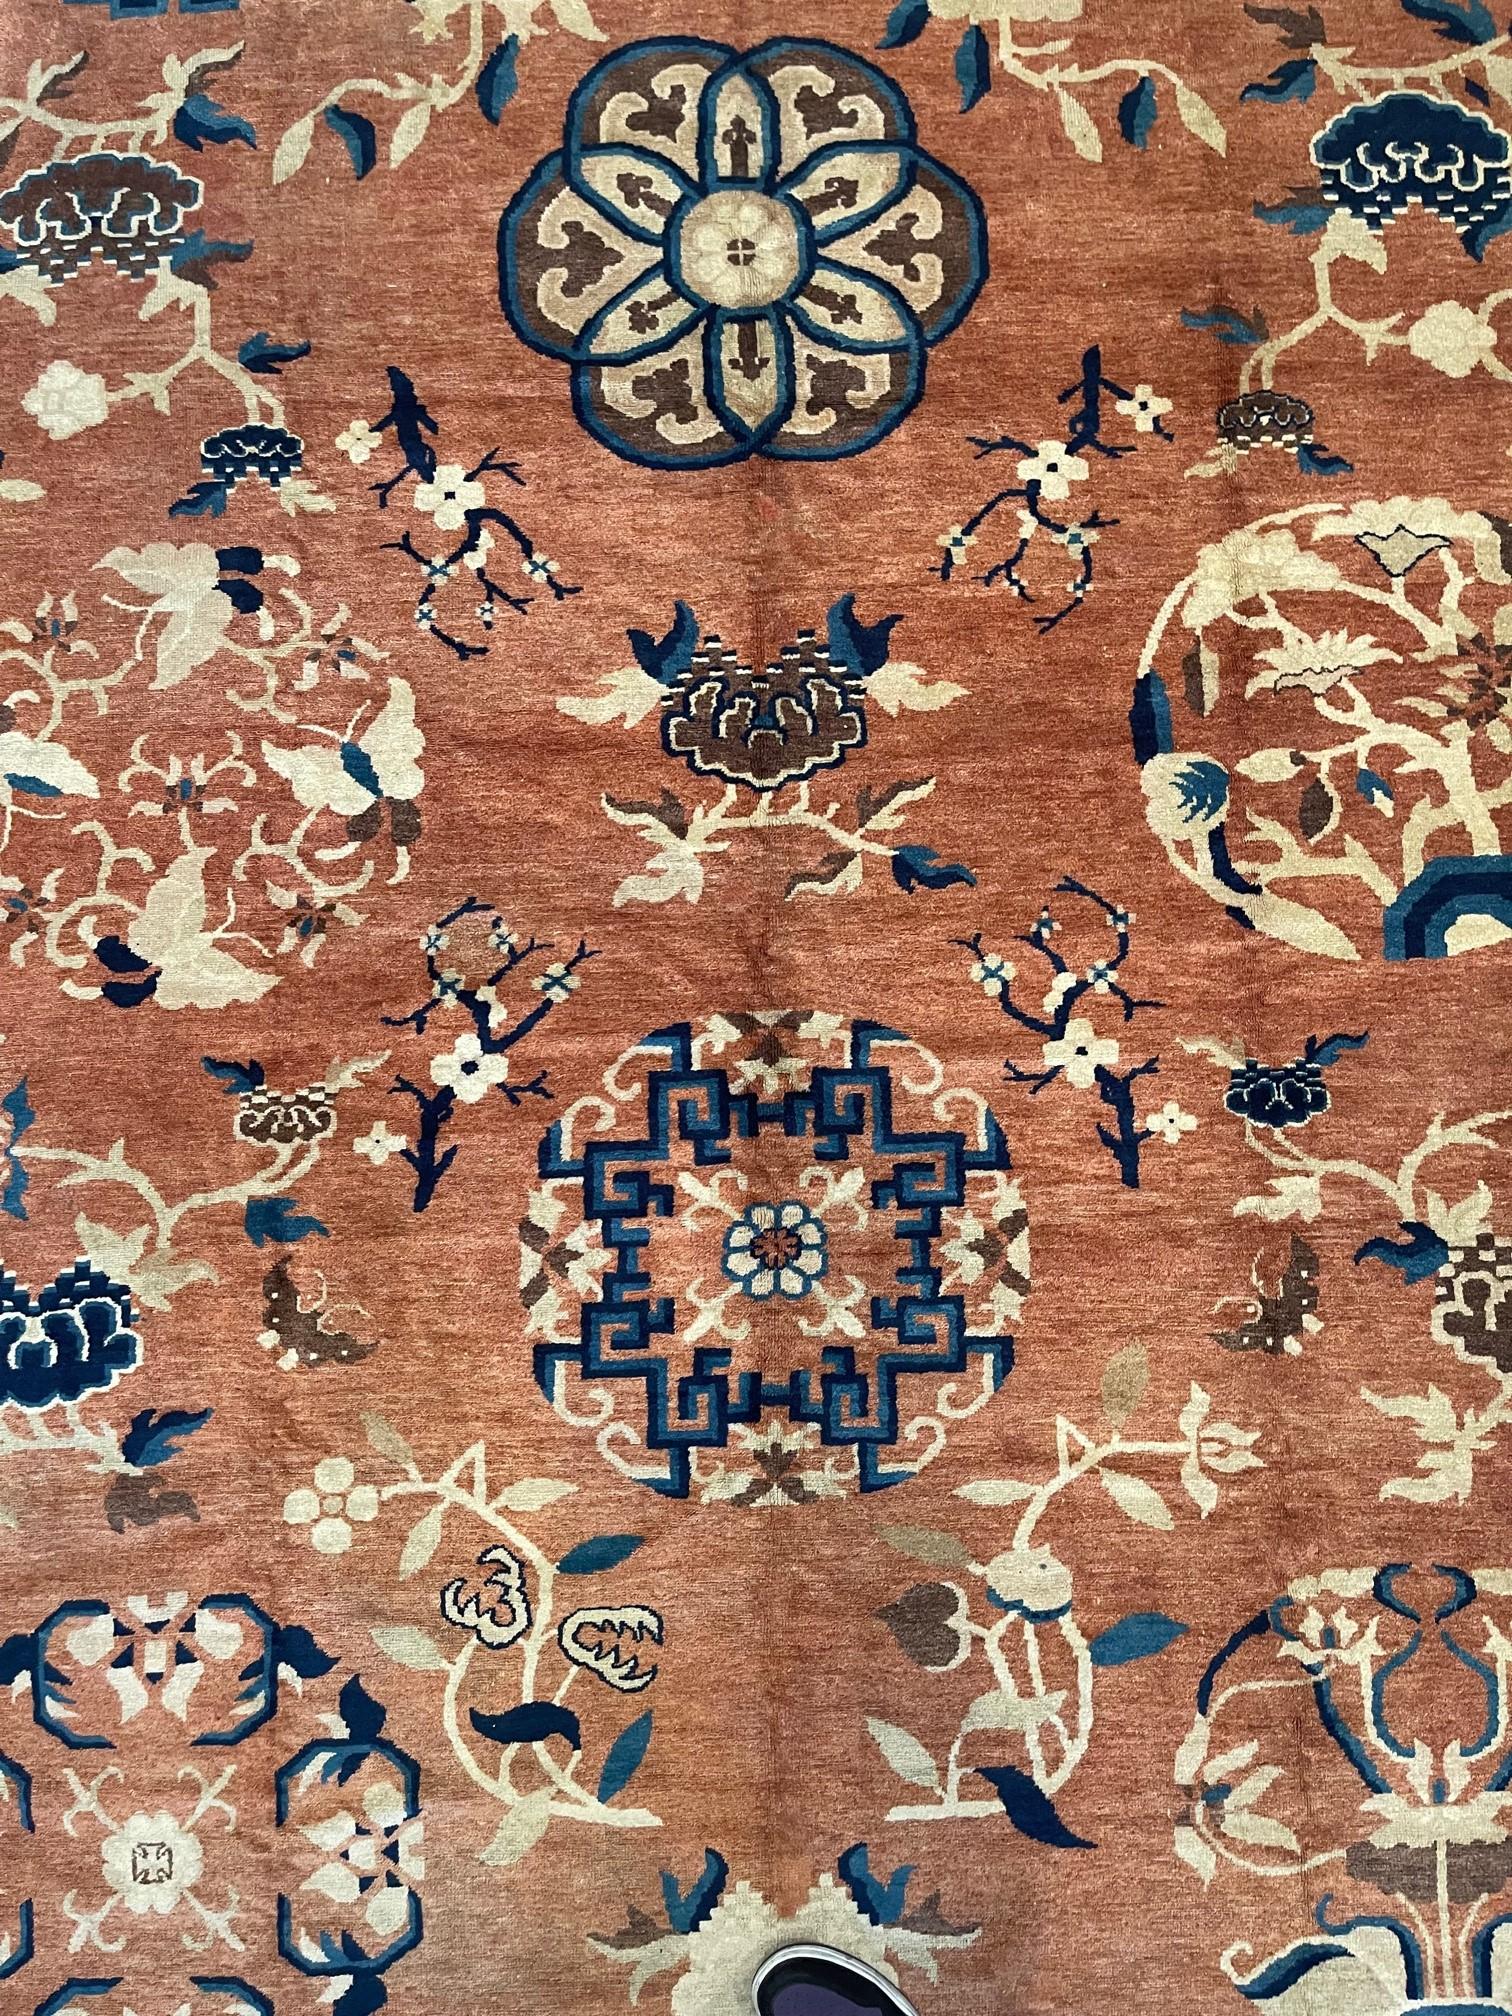 The Older Antique Chinese Rugs, as opposed to most other productions of Chinese goods, were woven almost exclusively for internal consumption. Since they were mostly sheltered from European and Western influences, this offers us the reason why these